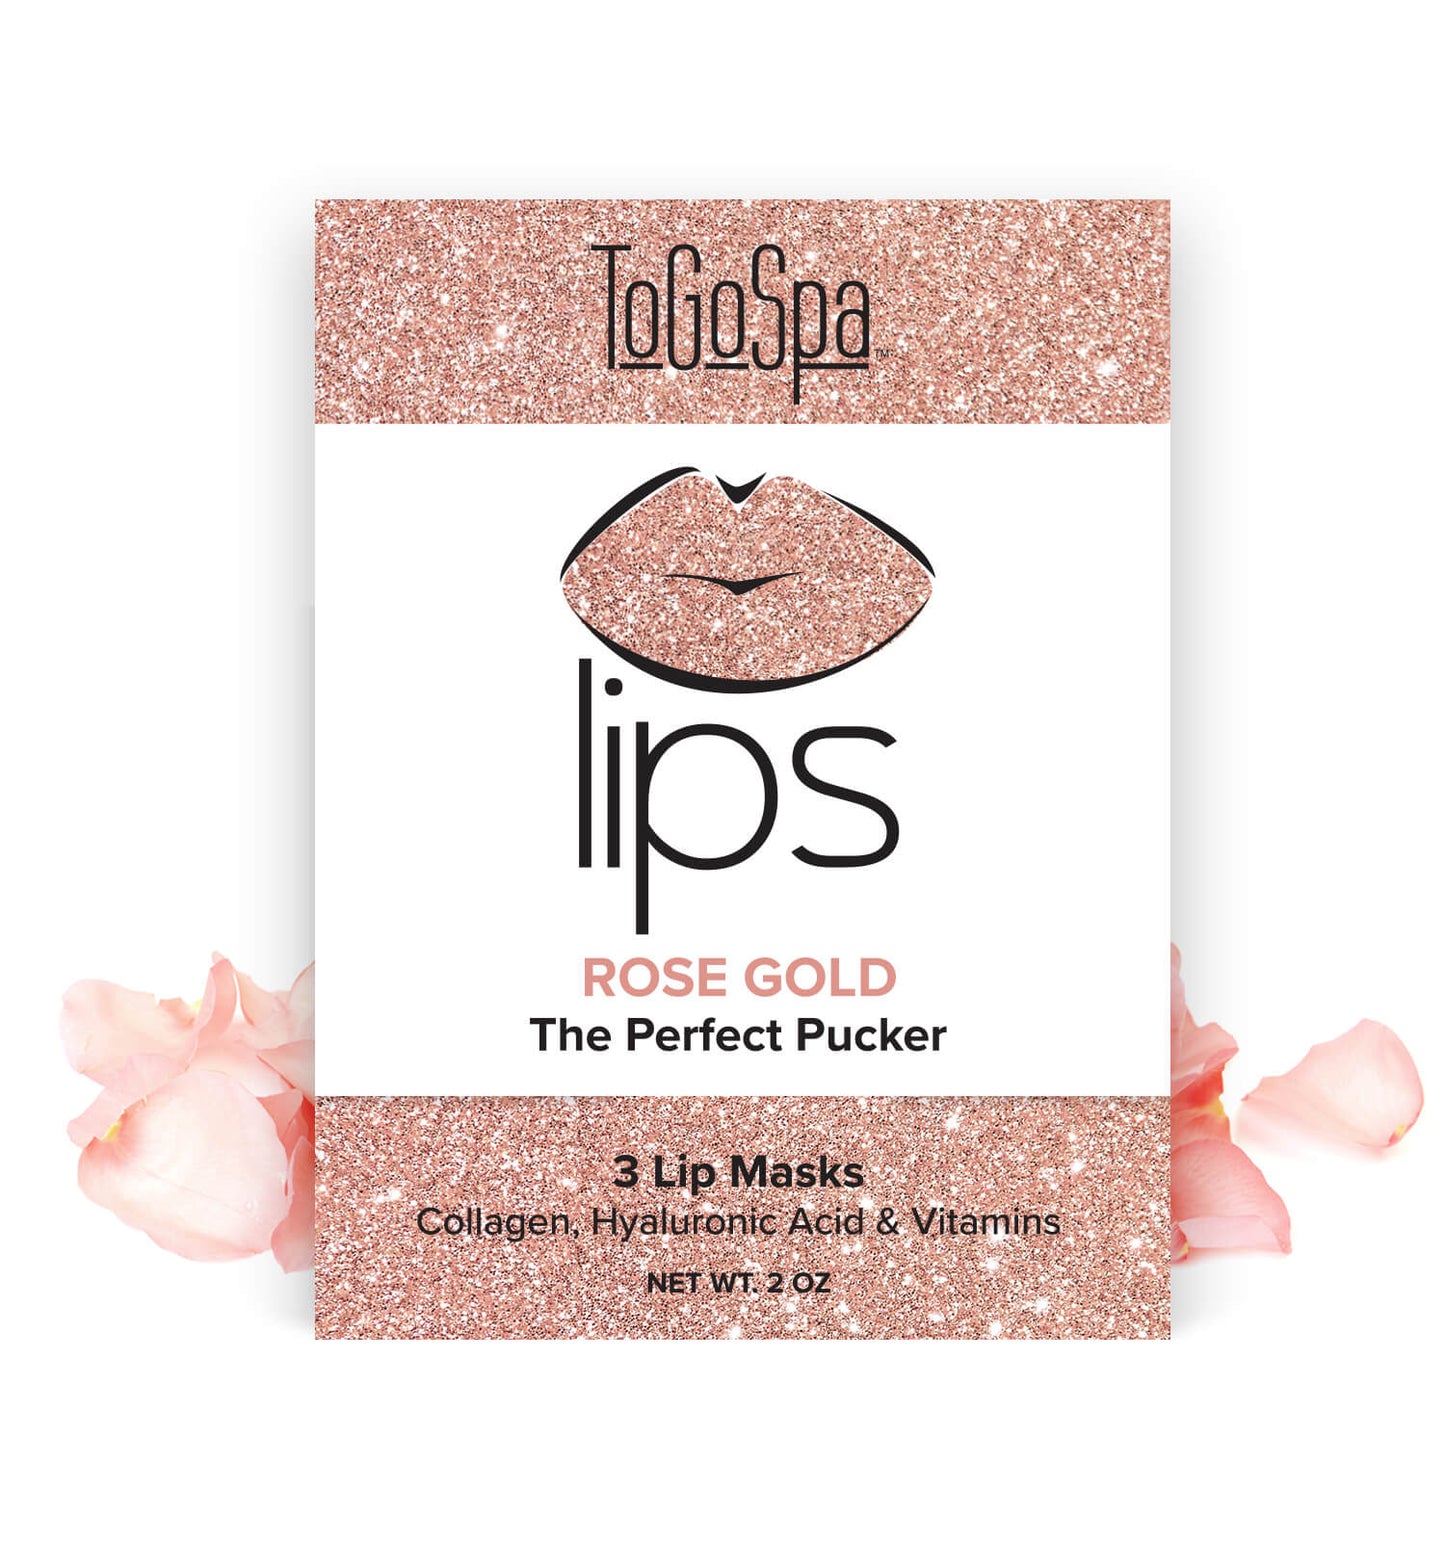 Rose Gold LIPS by ToGoSpa